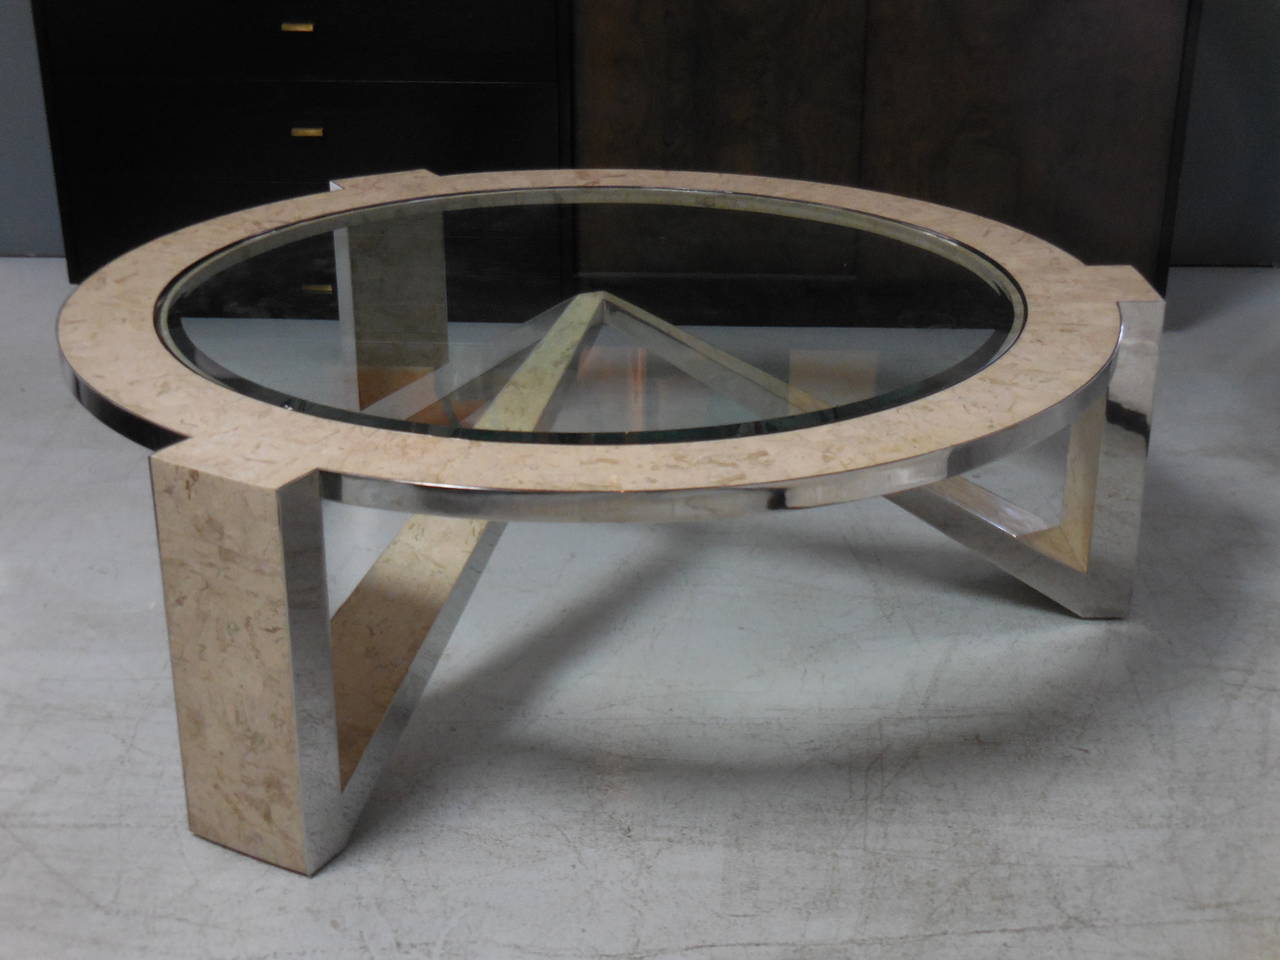 A rare coffee table by Gene Jonson and Robert Marcius. Tessellated stone and mirror polish stainless steel.